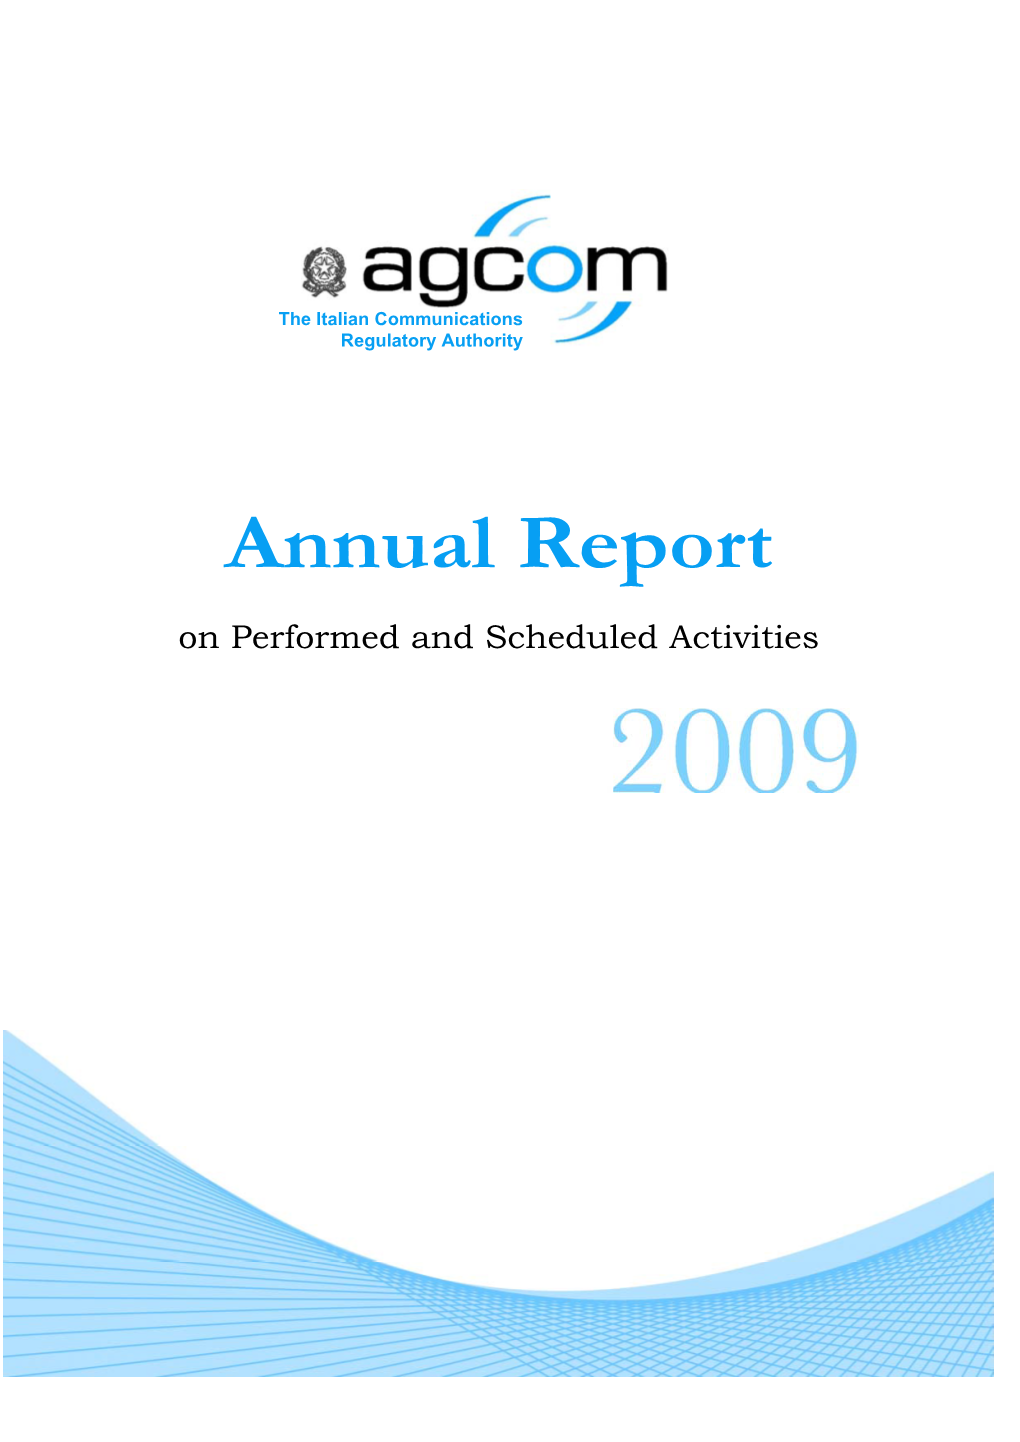 Annual Report on Performed and Scheduled Activities